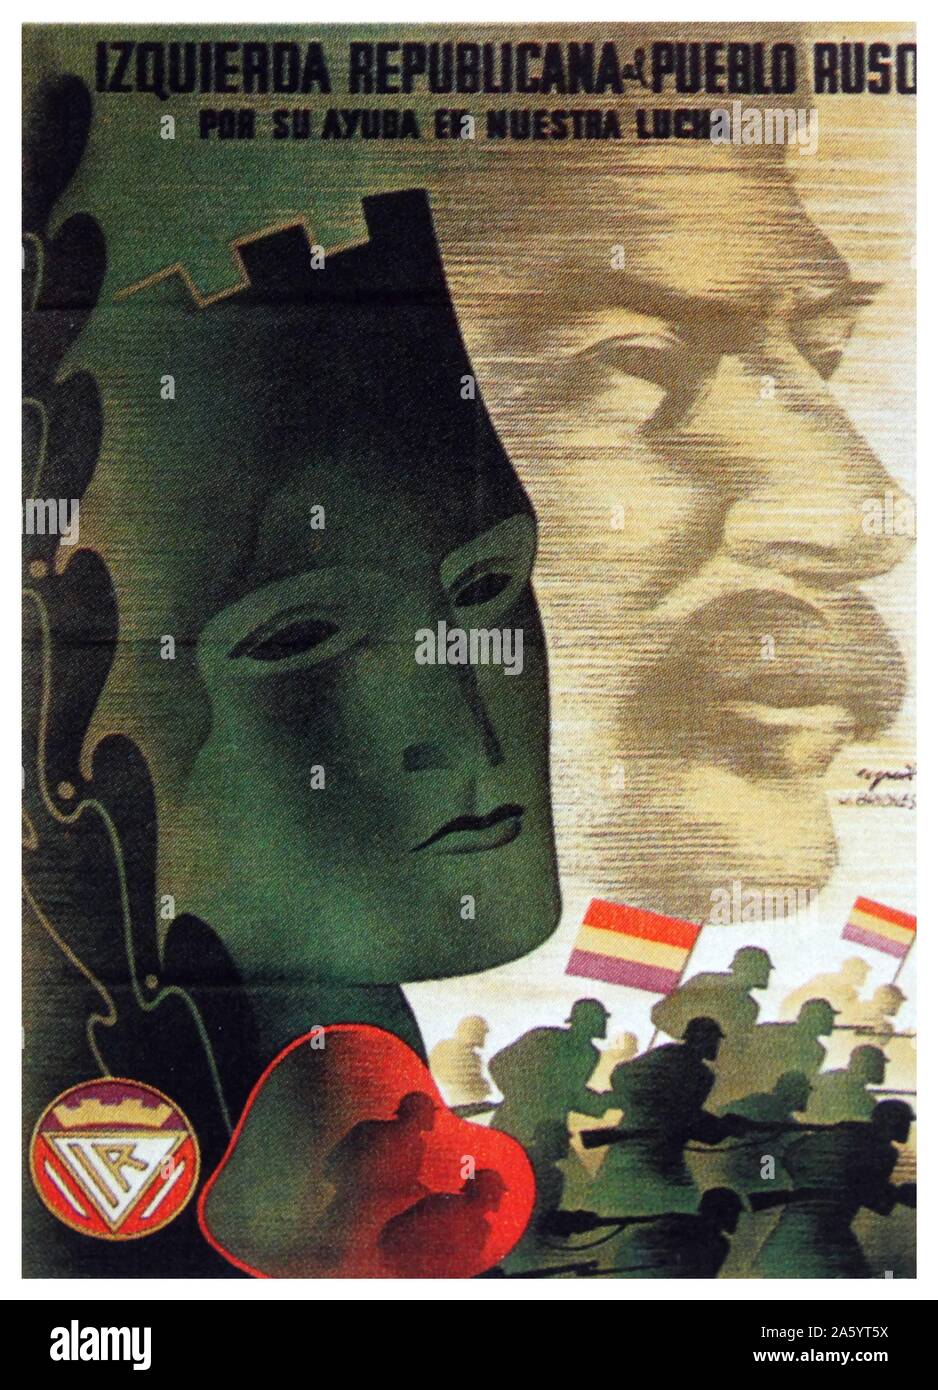 Russia and Its Help in Our Fight! A republican poster from the Spanish Civil War, showing an image of Stalin Stock Photo